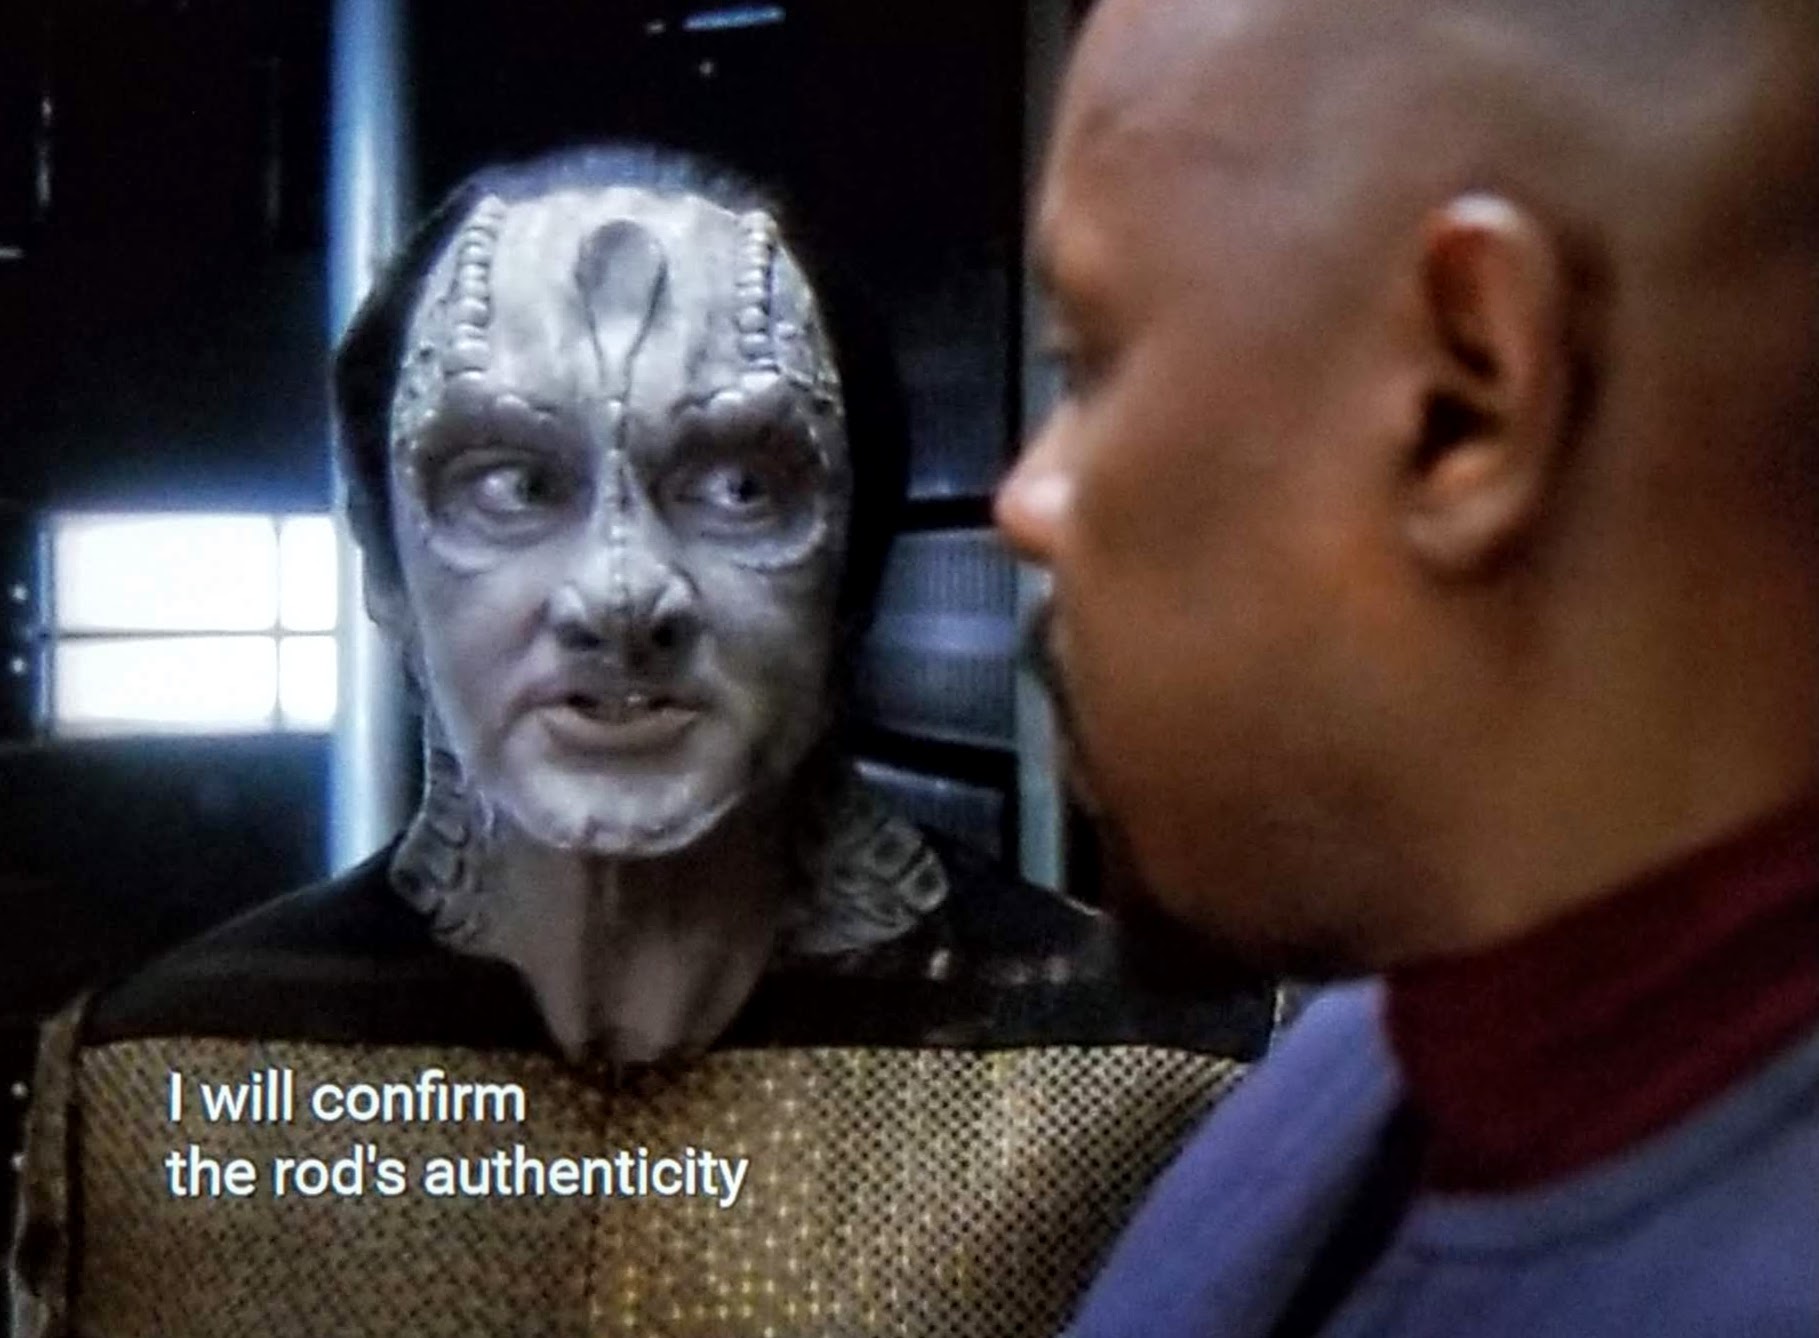 garack will confirm the rod's authenticity ds9 Blank Meme Template